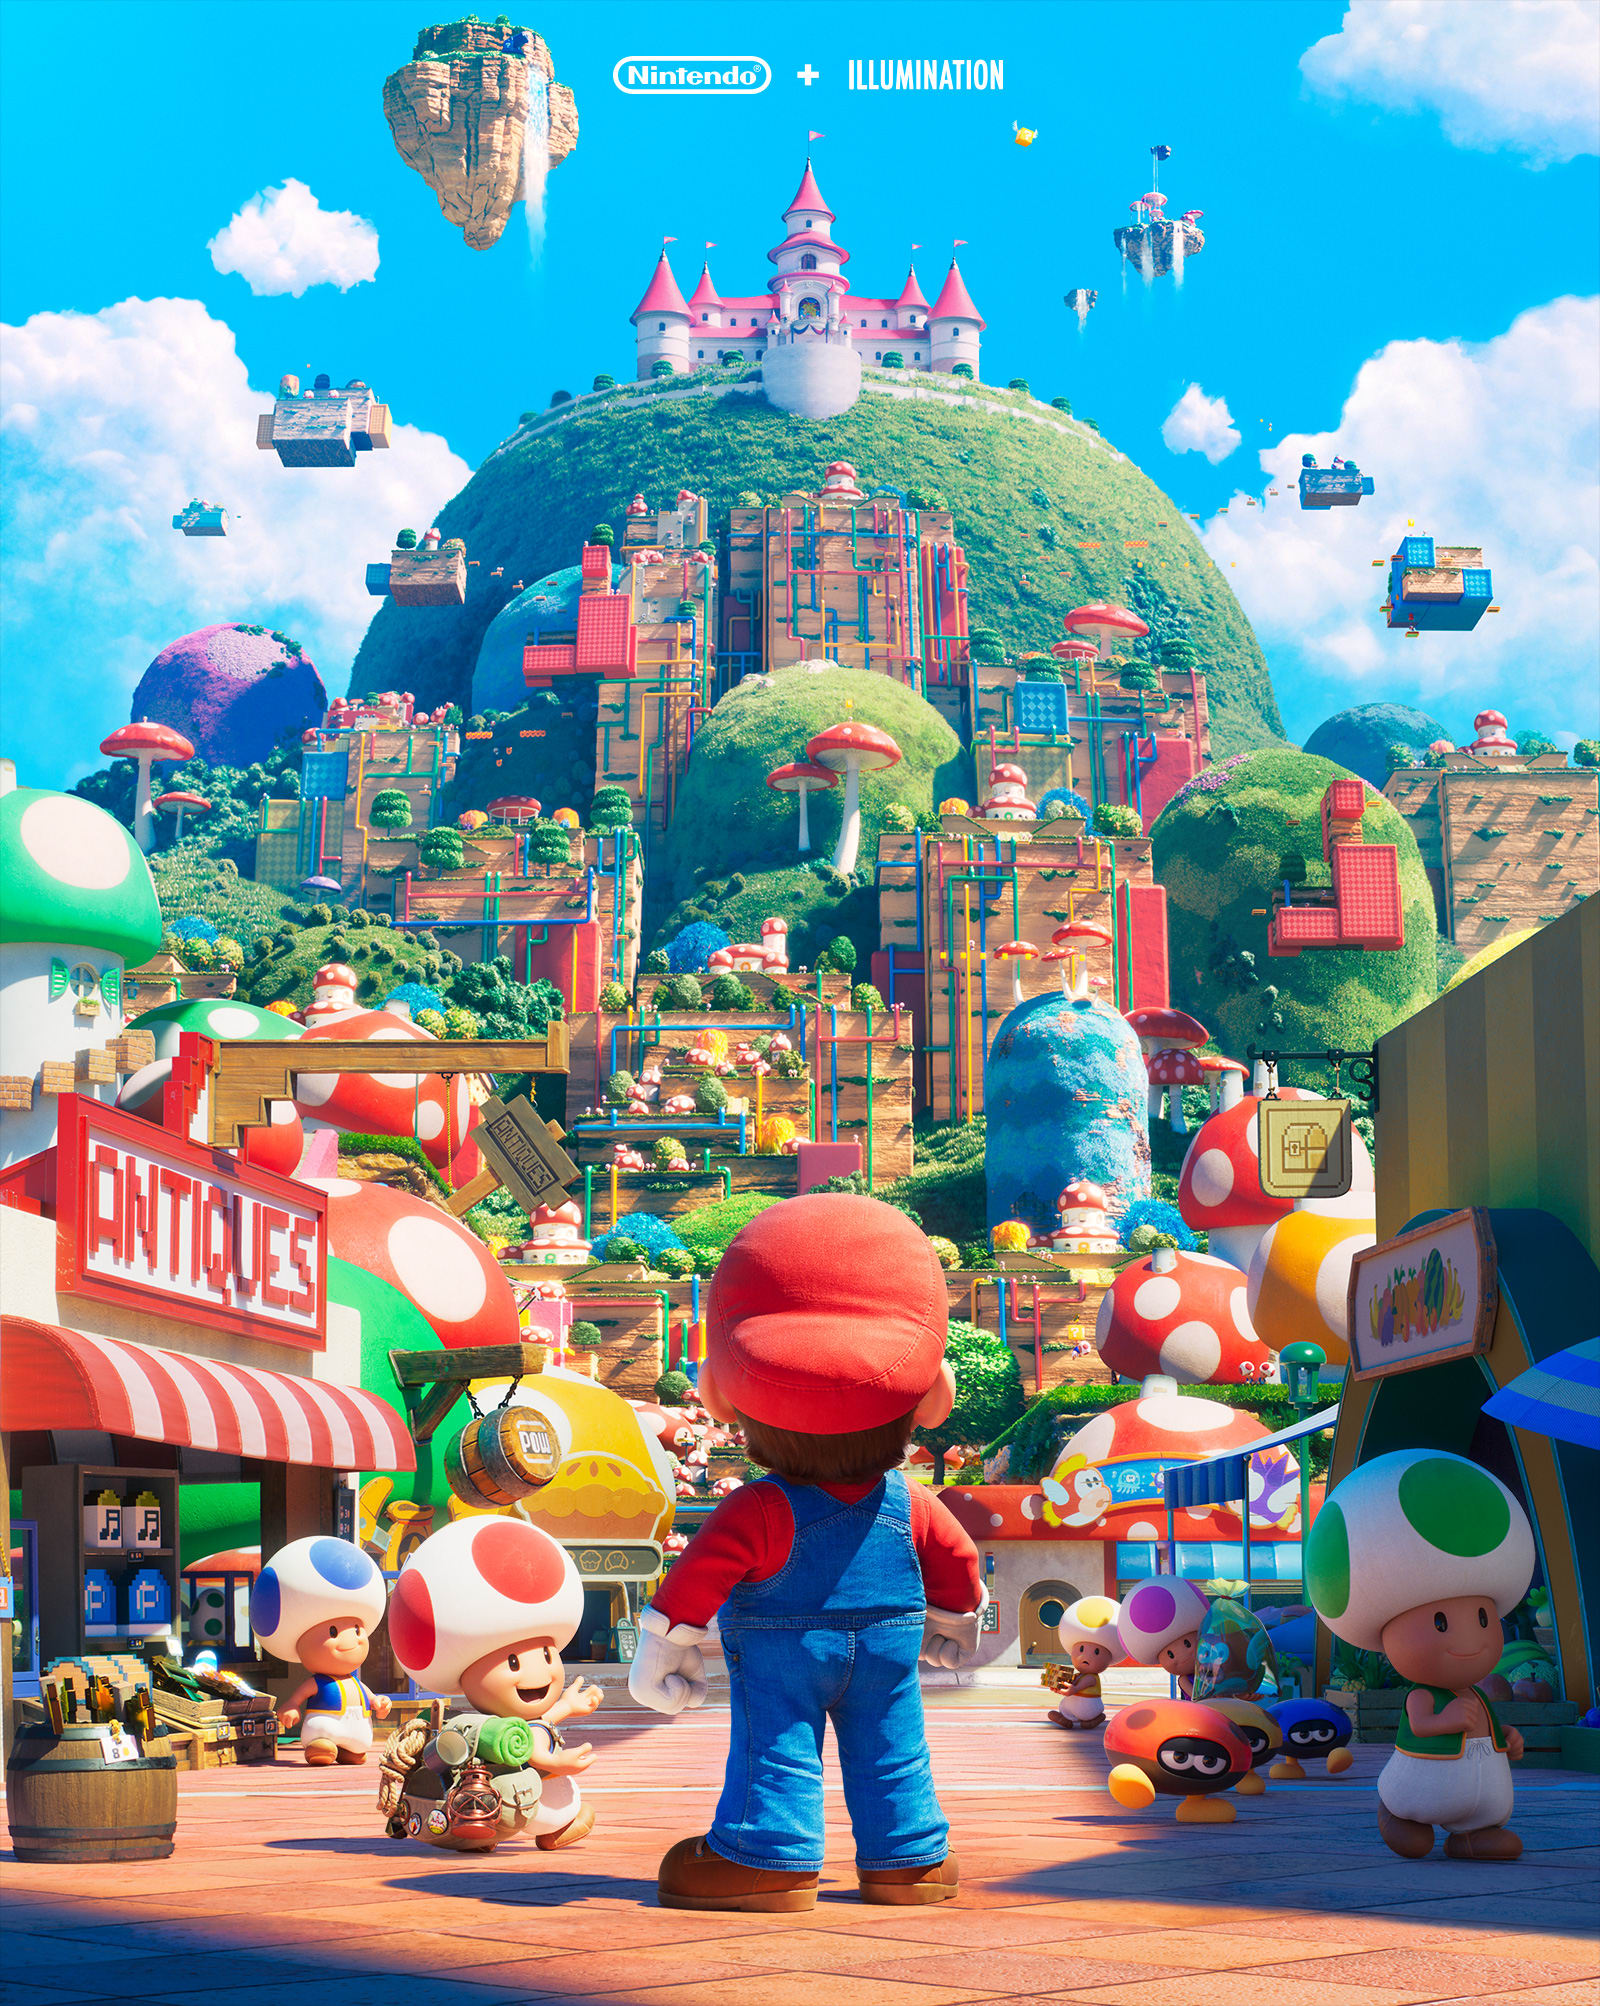 Watch the world premier trailer for the upcoming The Super Mario Bros. film